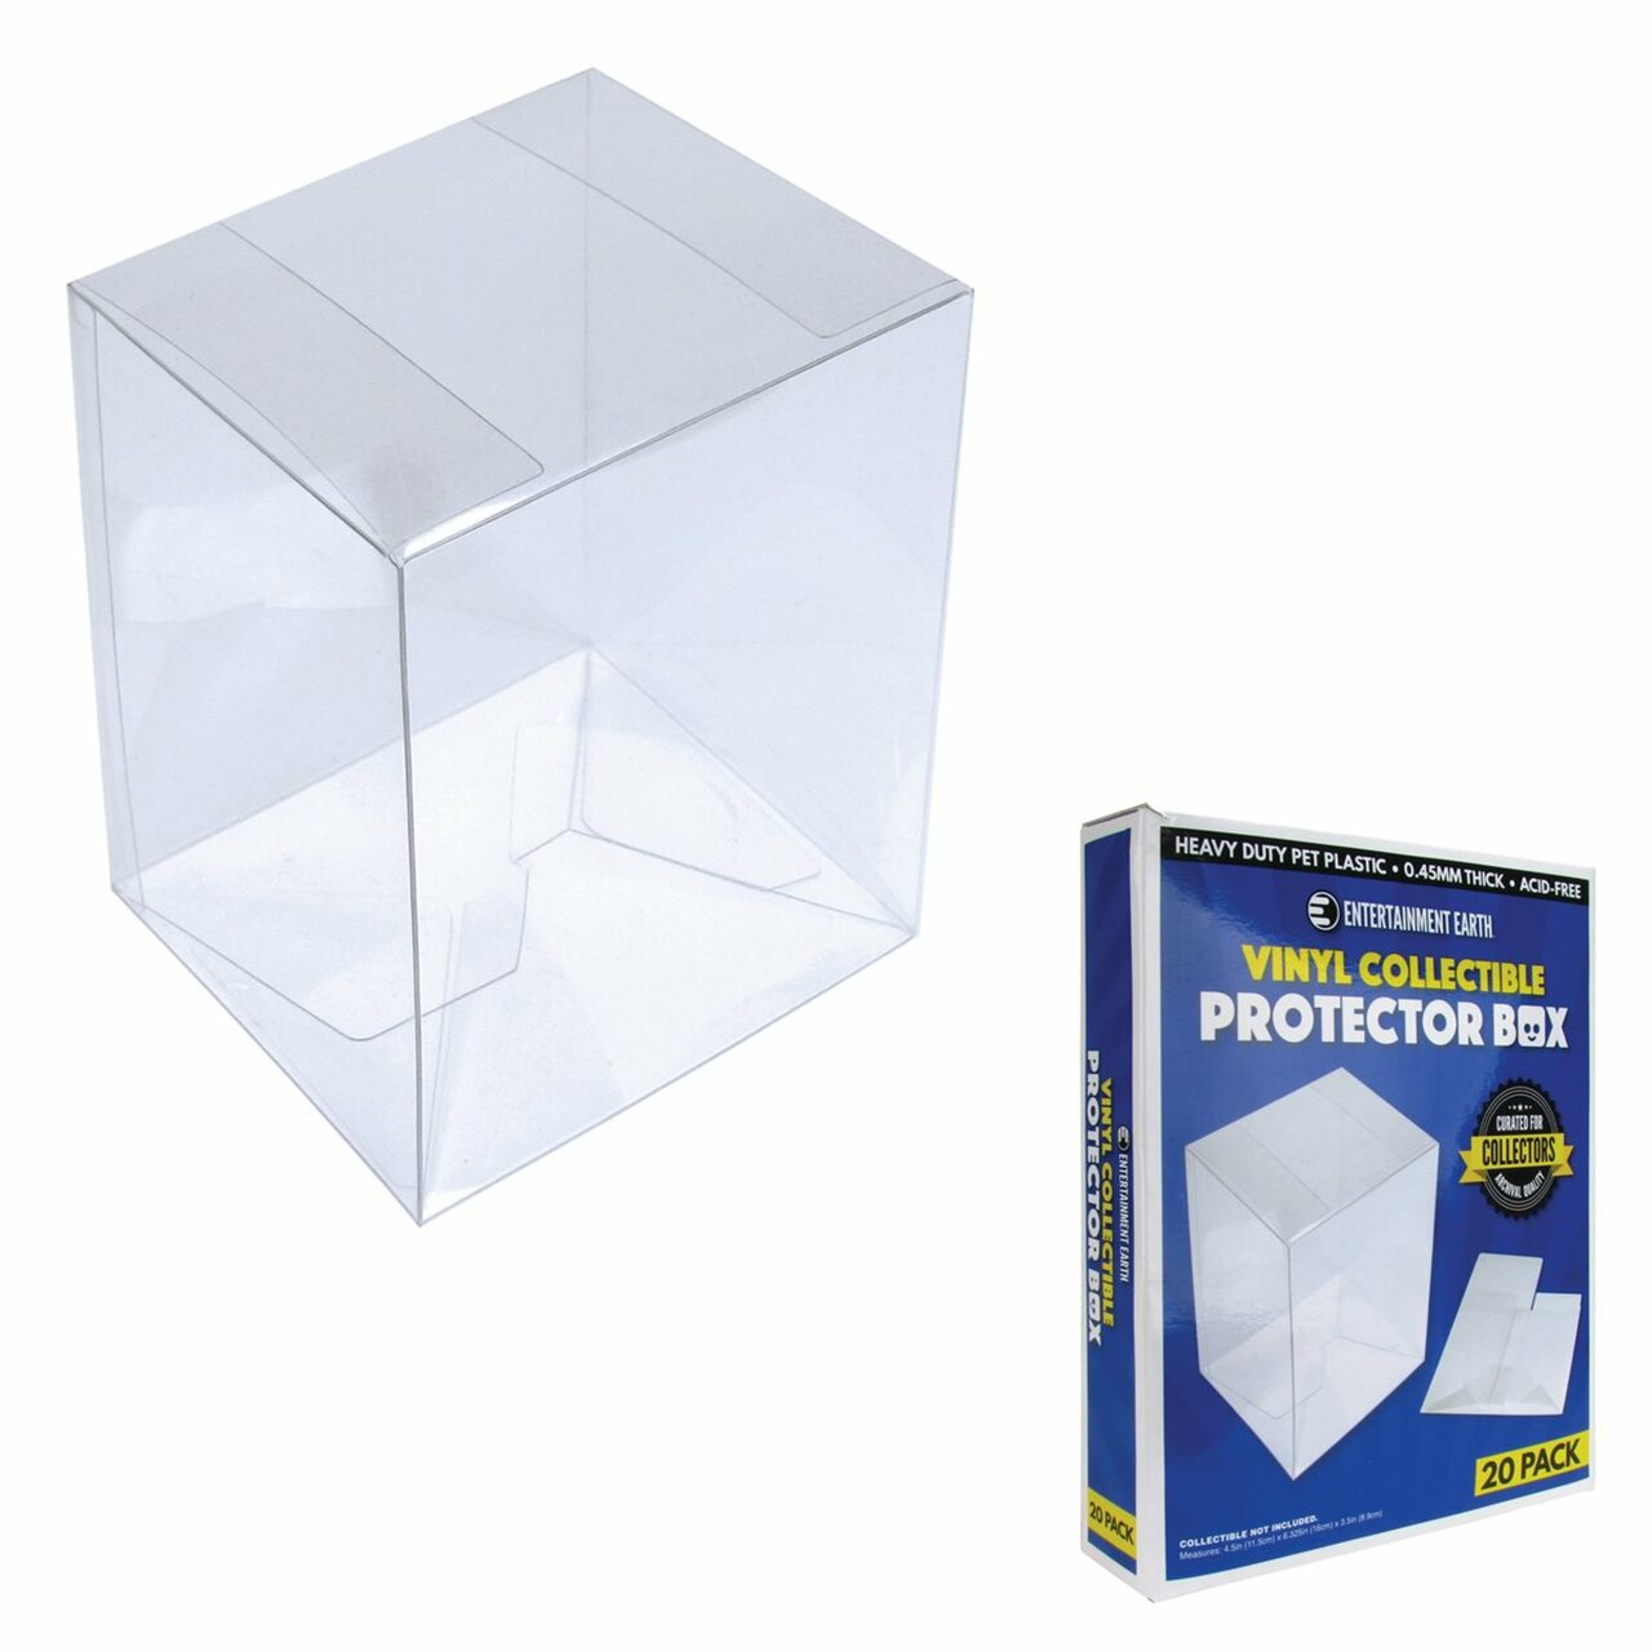 Funko Entertainment Earth Vinyl Collectible Protector Box 20-Pack